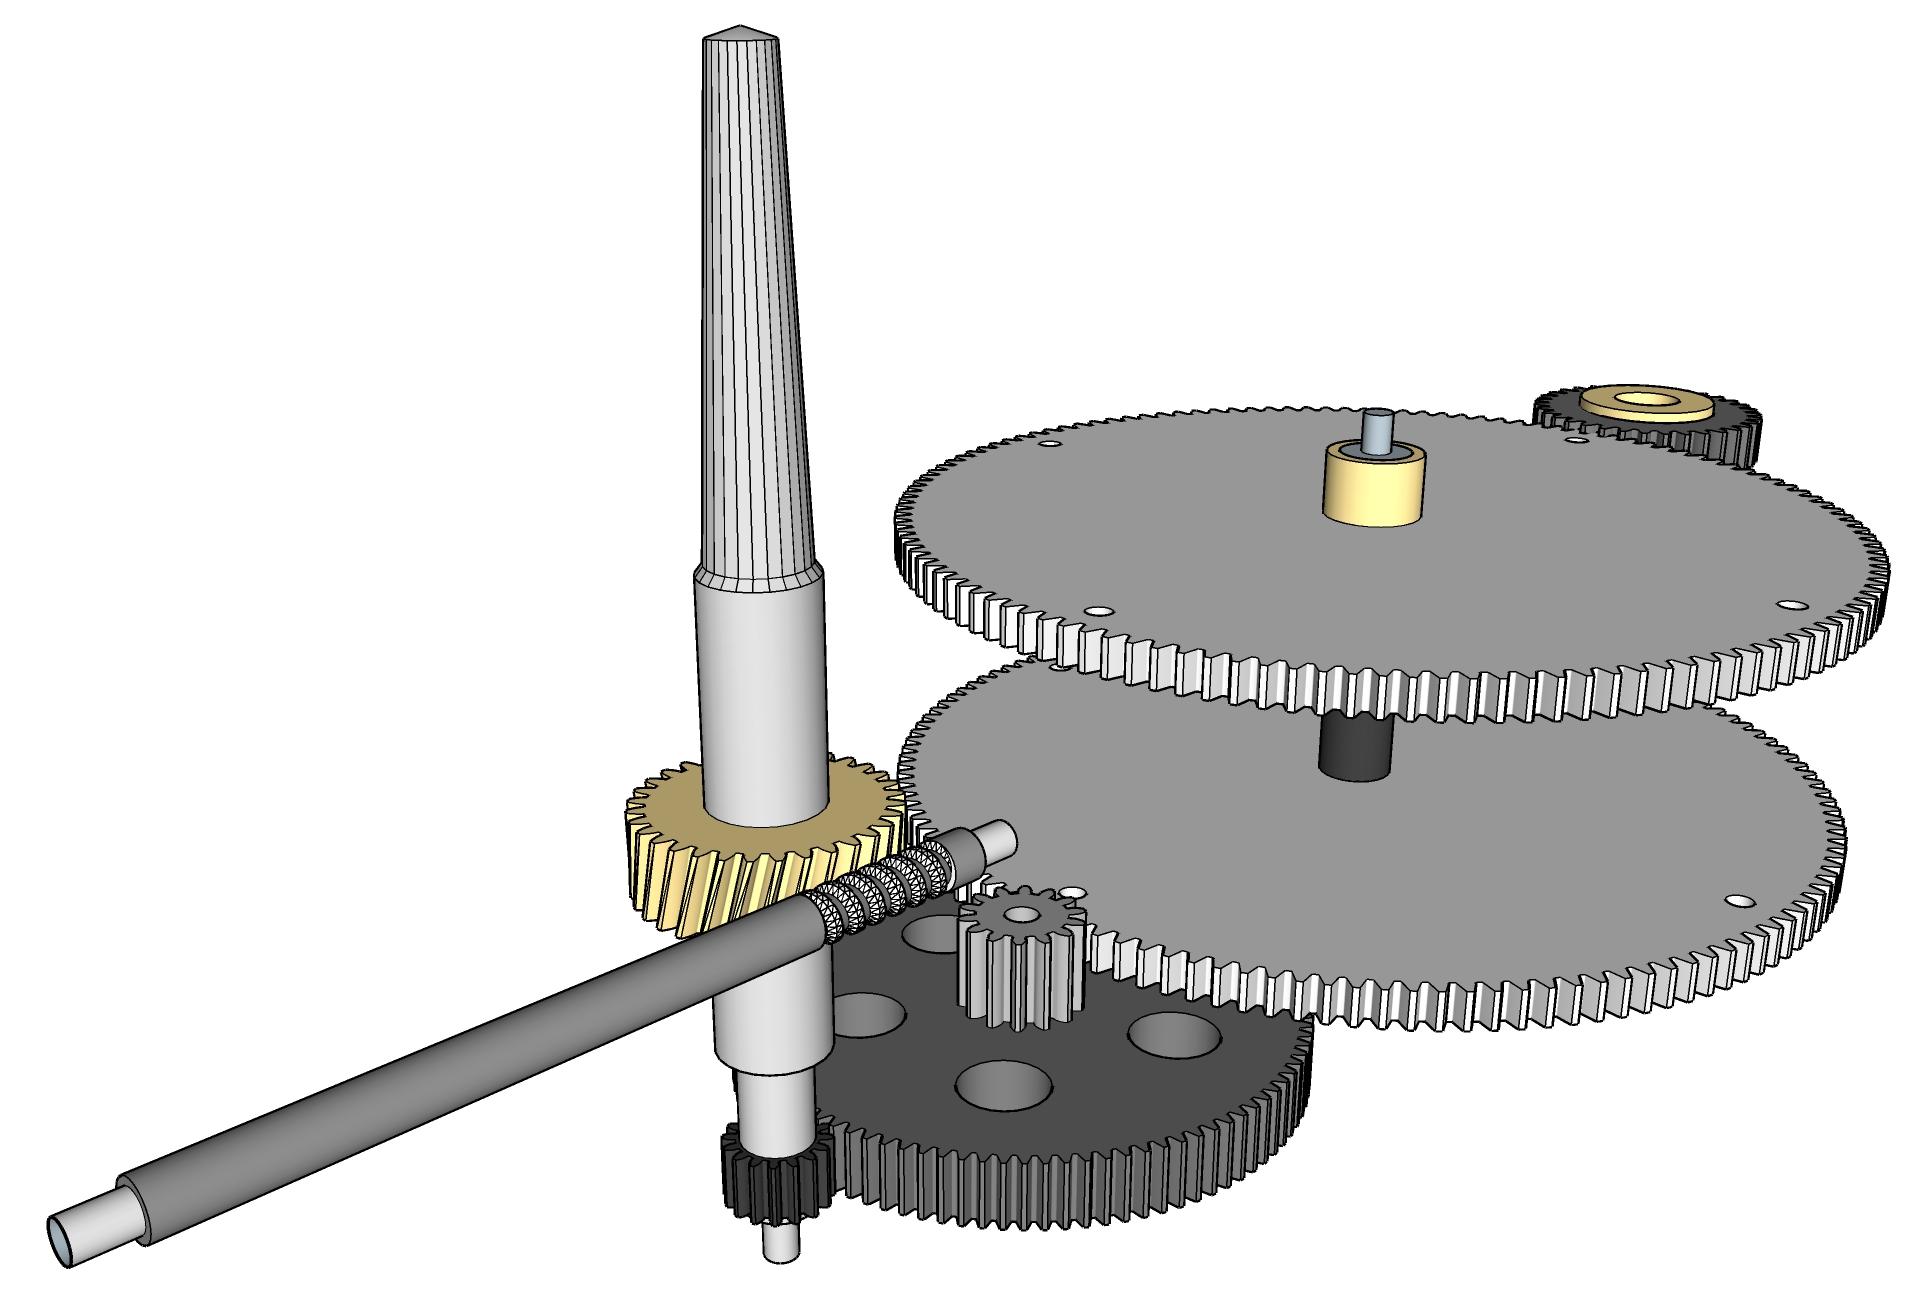 Gears, Gears, Gears -- Make Anything Move - a 3D Printed Gear Drive Train for Spring Powered Phonograph Motor